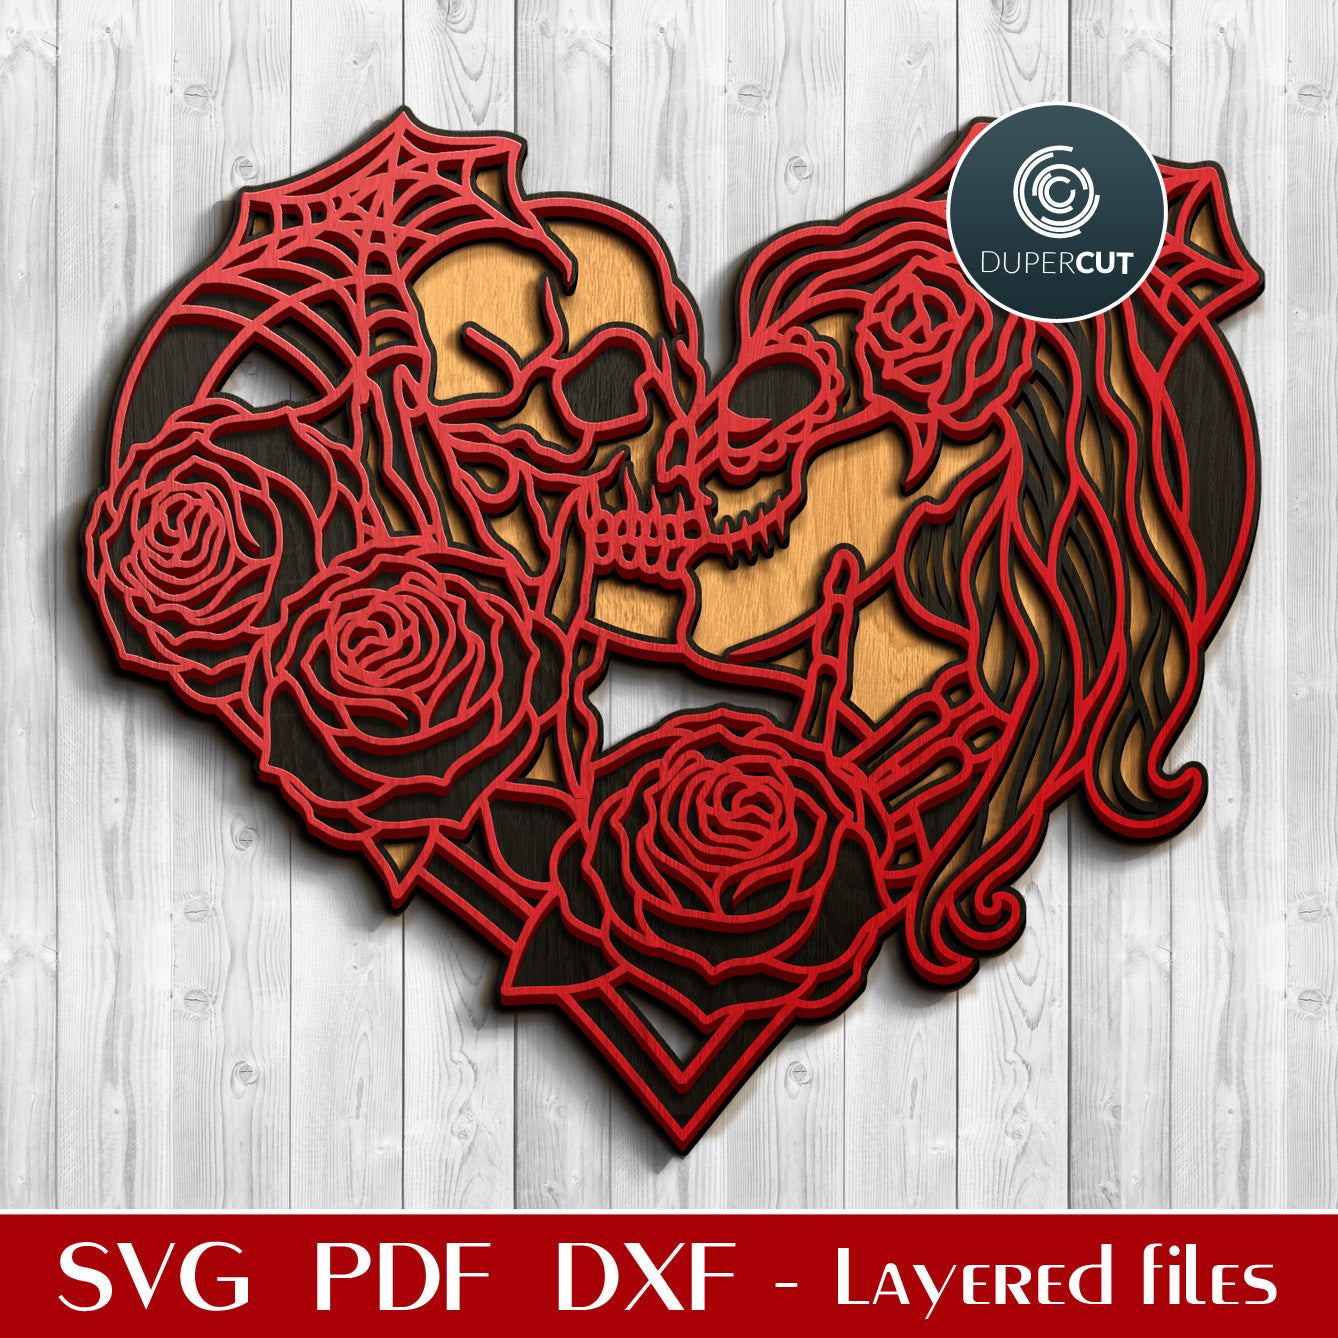 Kissing skulls - steampunk Halloween design, Day of the Dead - SVG PDF DXF layered cutting files for Glowforge, Cricut, Silhouette cameo, CNC plasma machines